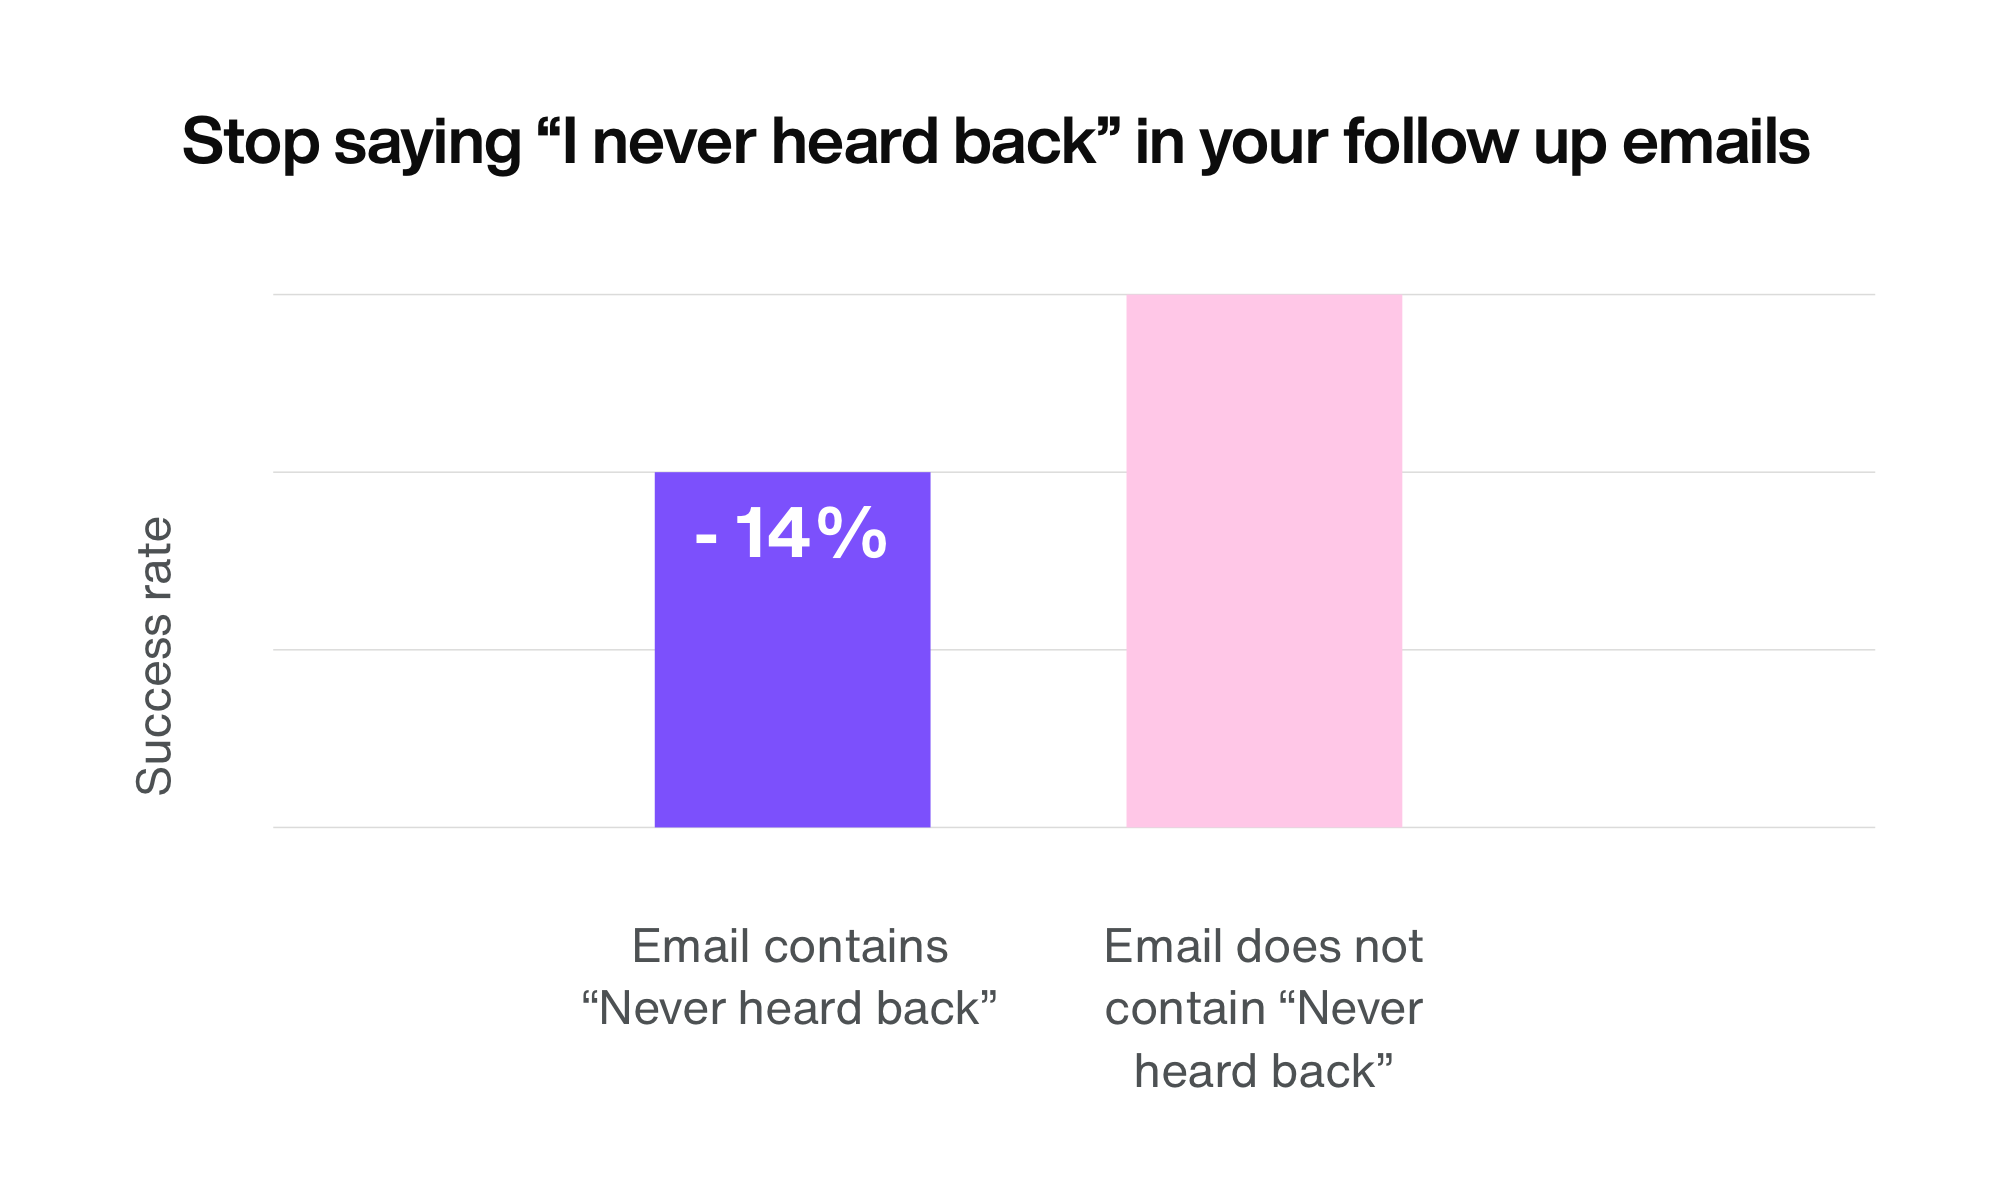 Stop saying “I never heard back” in your follow up emails